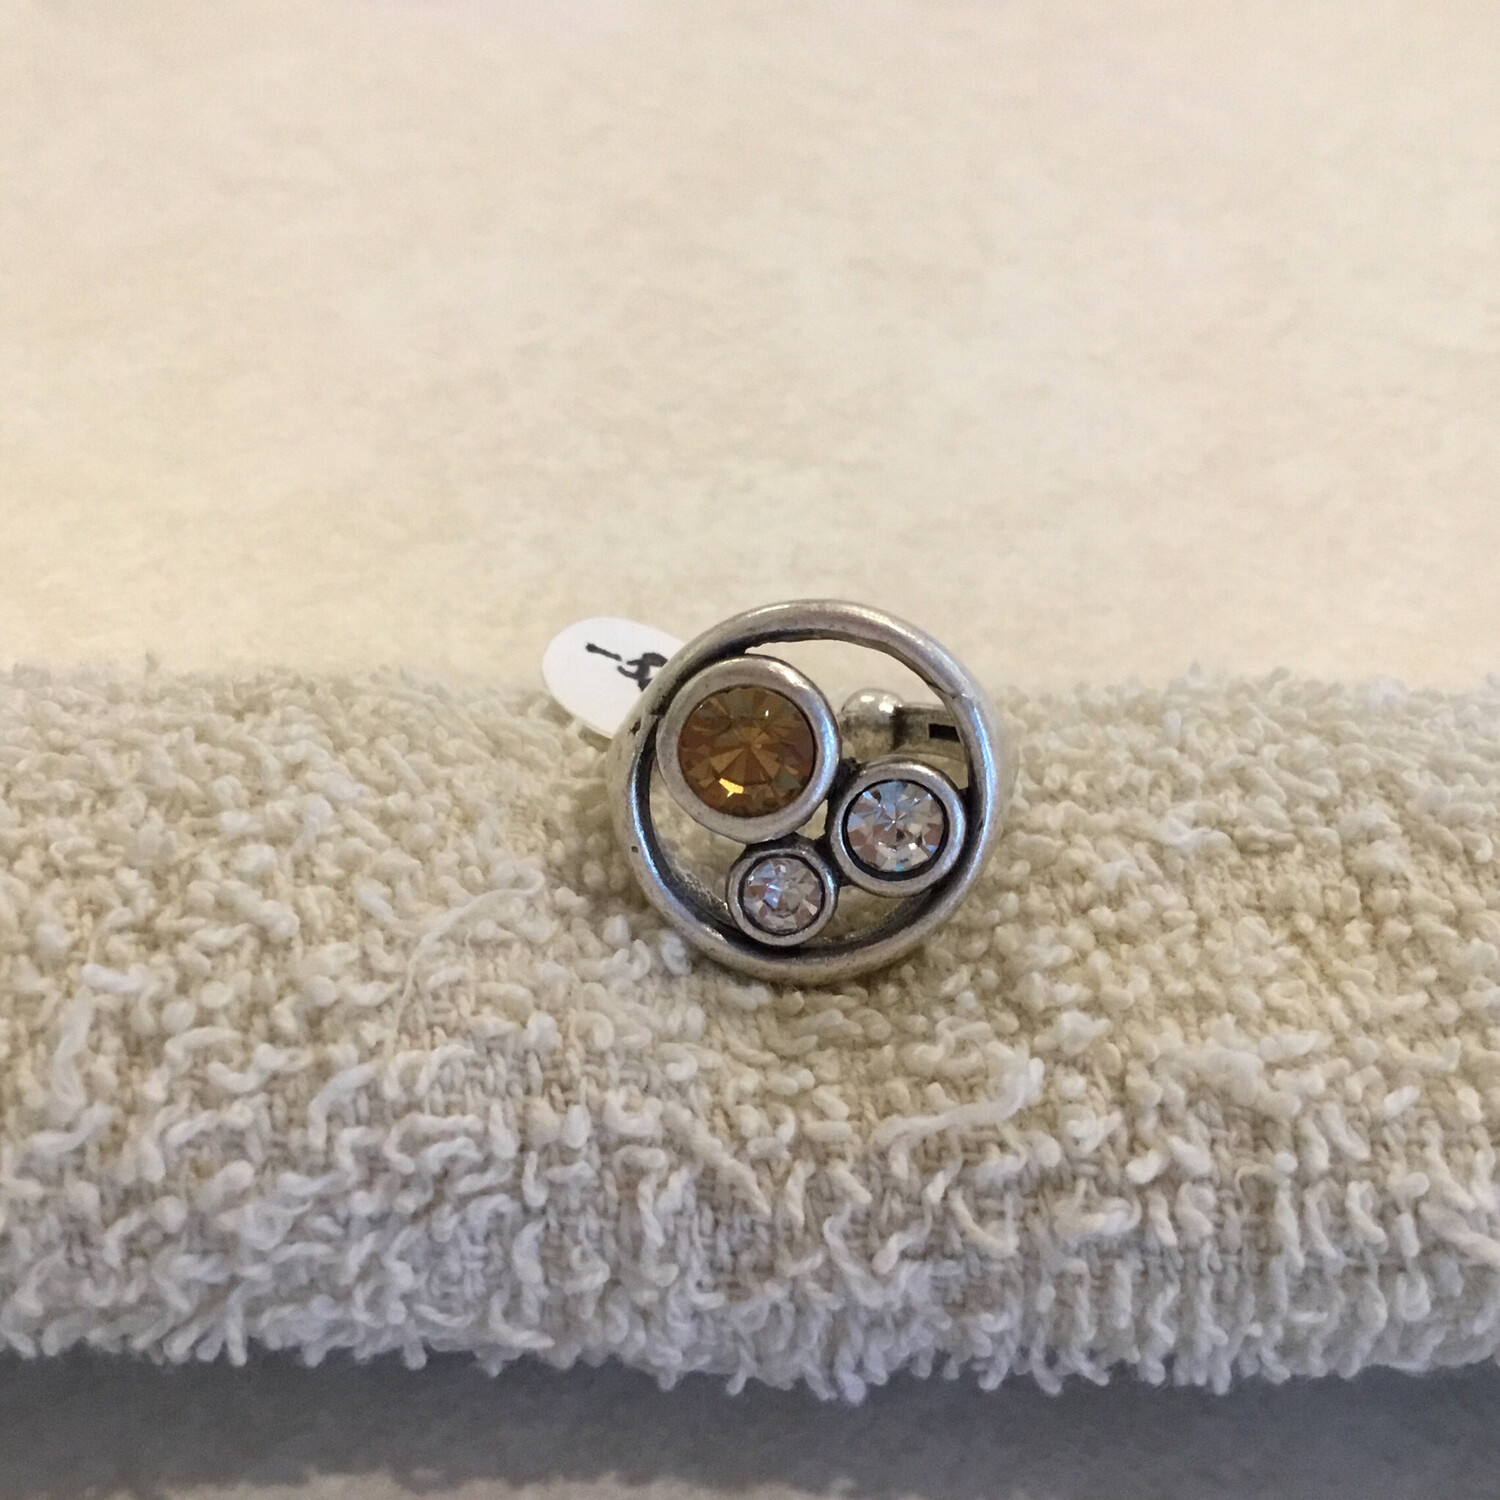 Handmade Pewter Adjustable Ring With Clear And Citrine Crystal